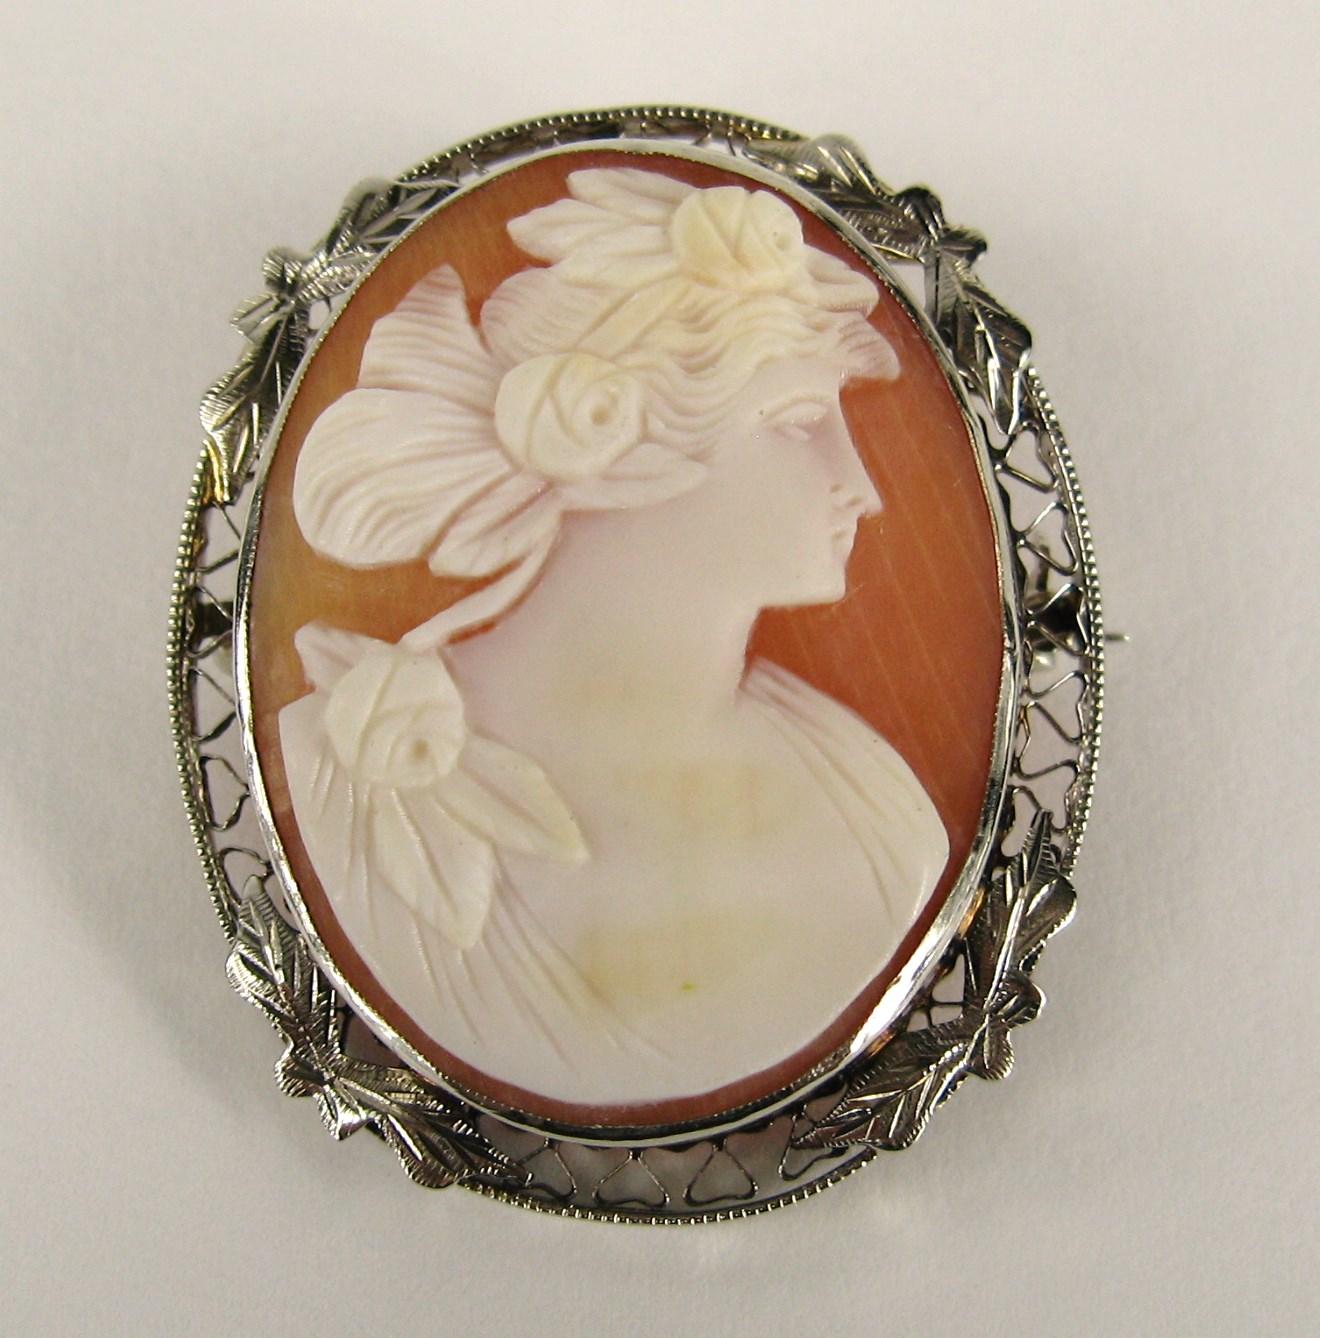 Antique Cameo 14 Karat Gold Brooch Pendant In Good Condition For Sale In Wallkill, NY